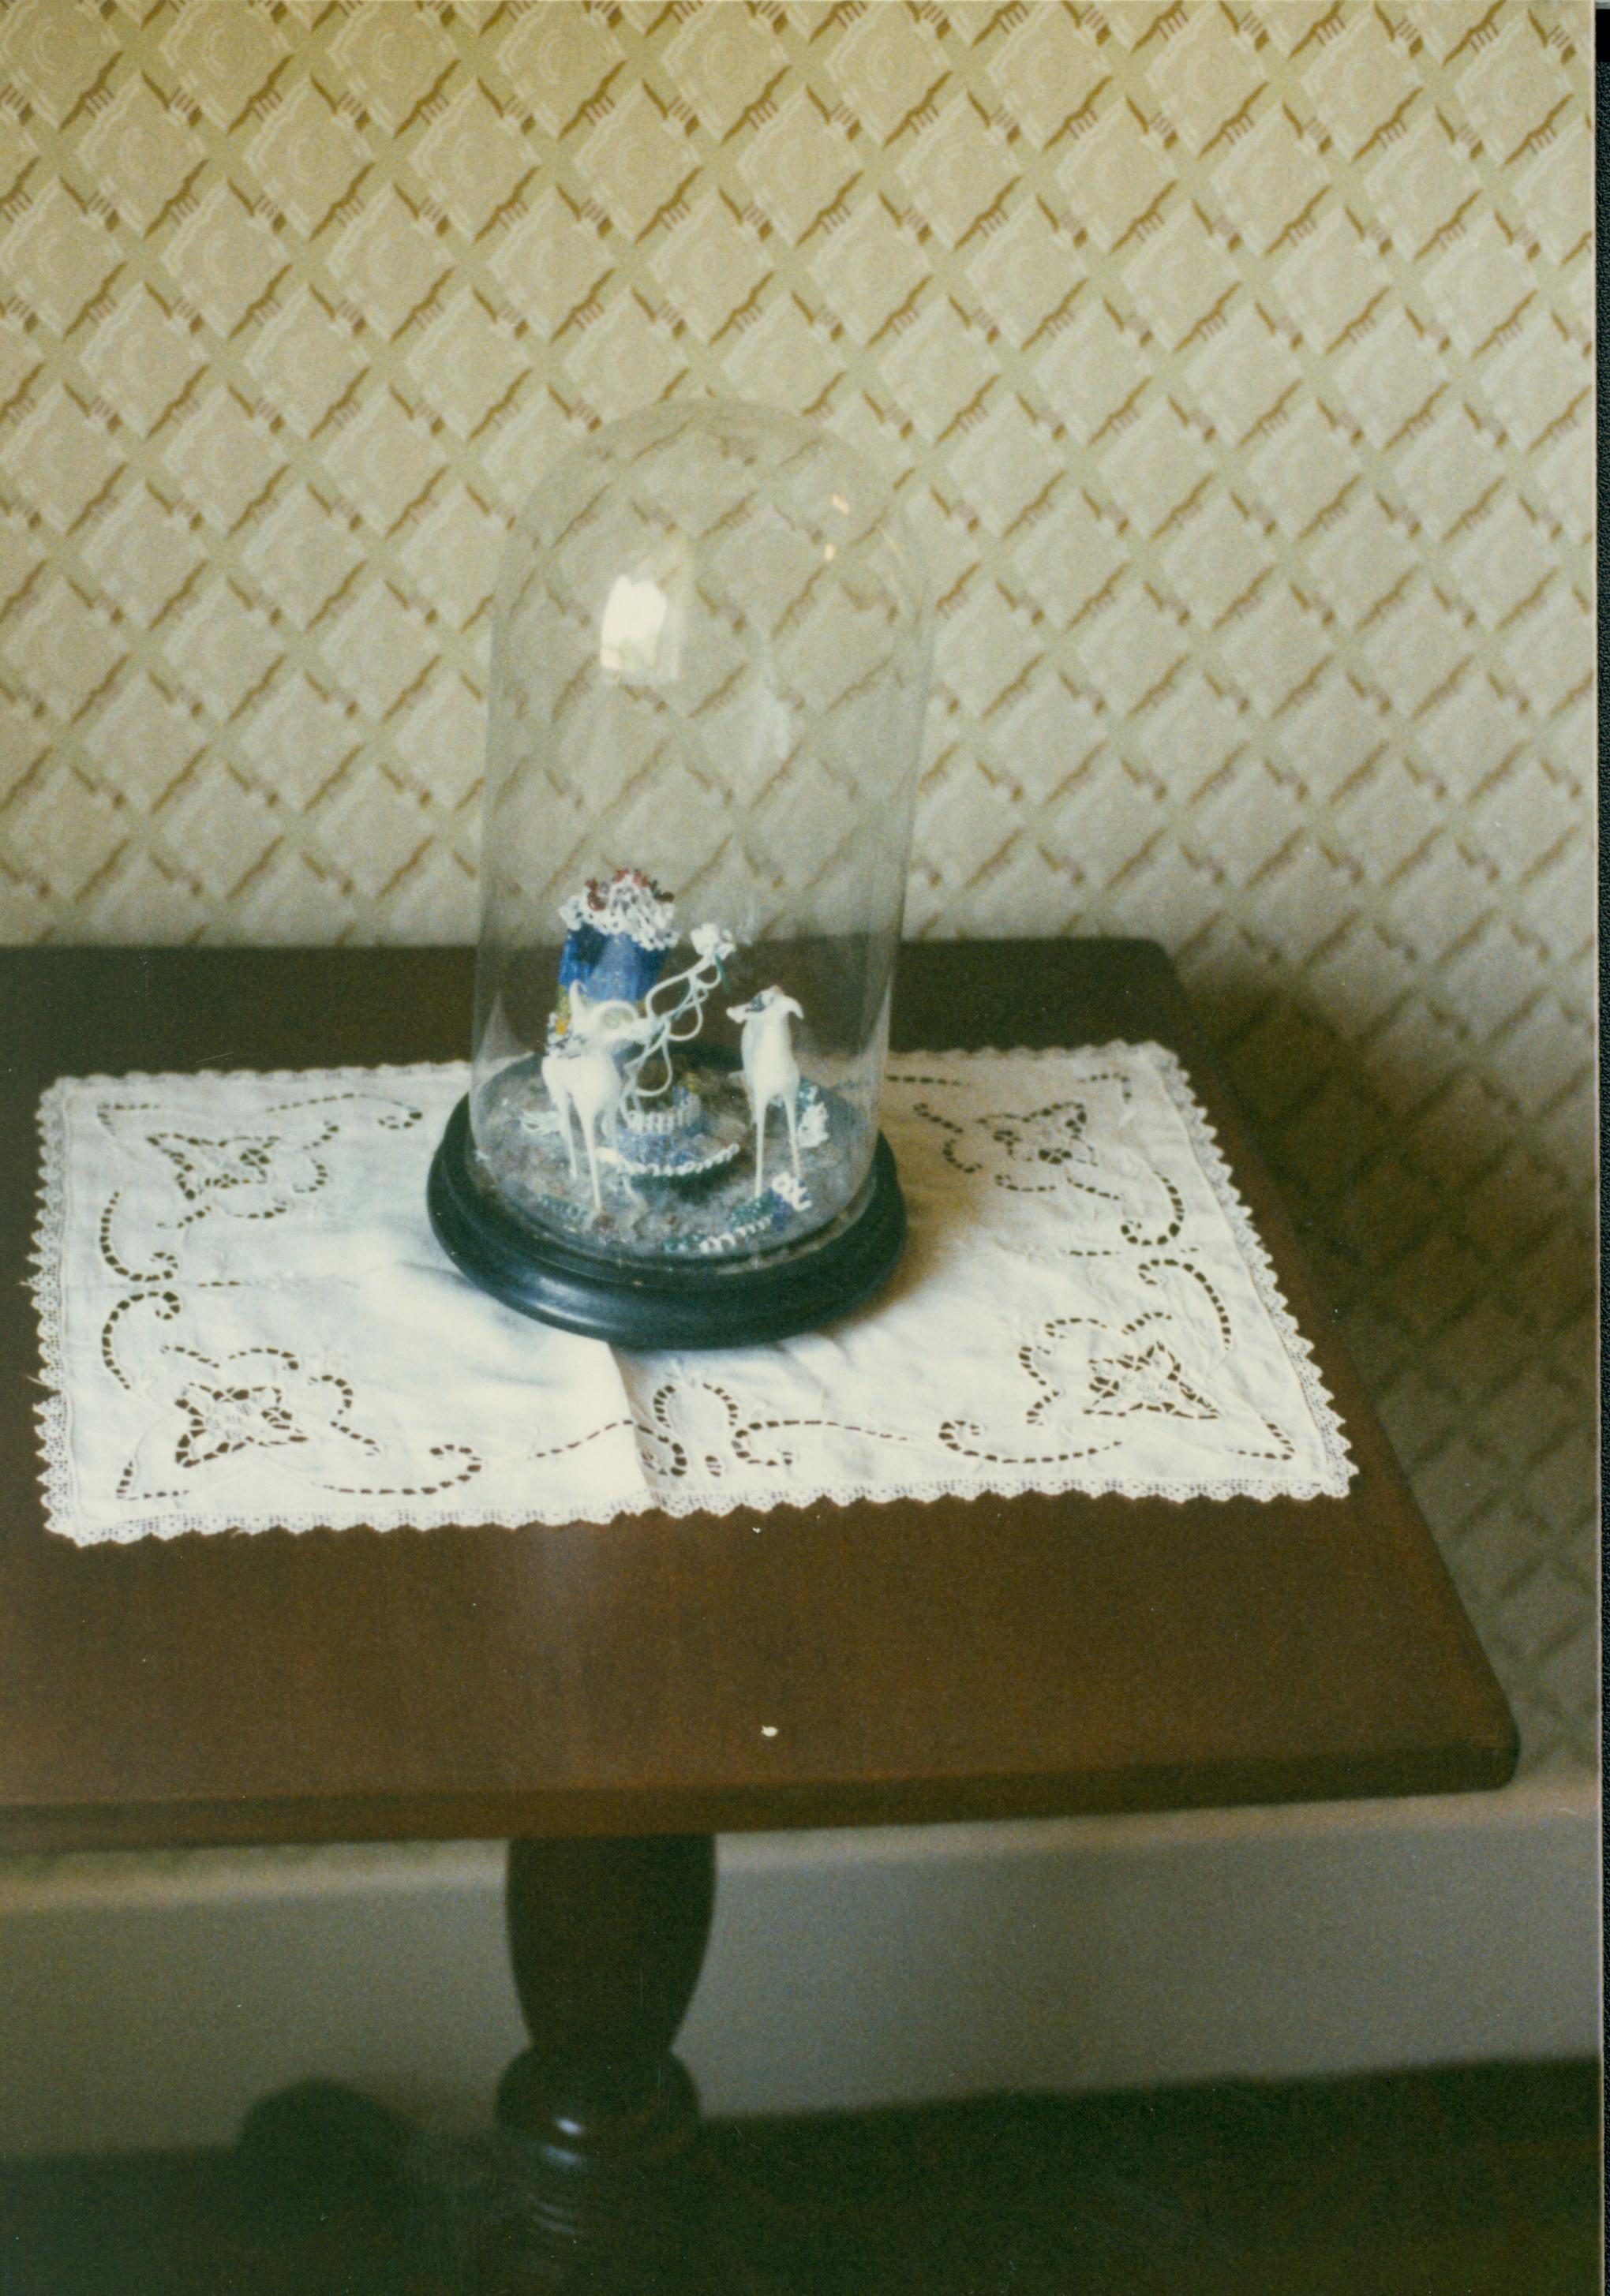 NA #12 Lincoln, Home, stair hall, figurine under glass, table